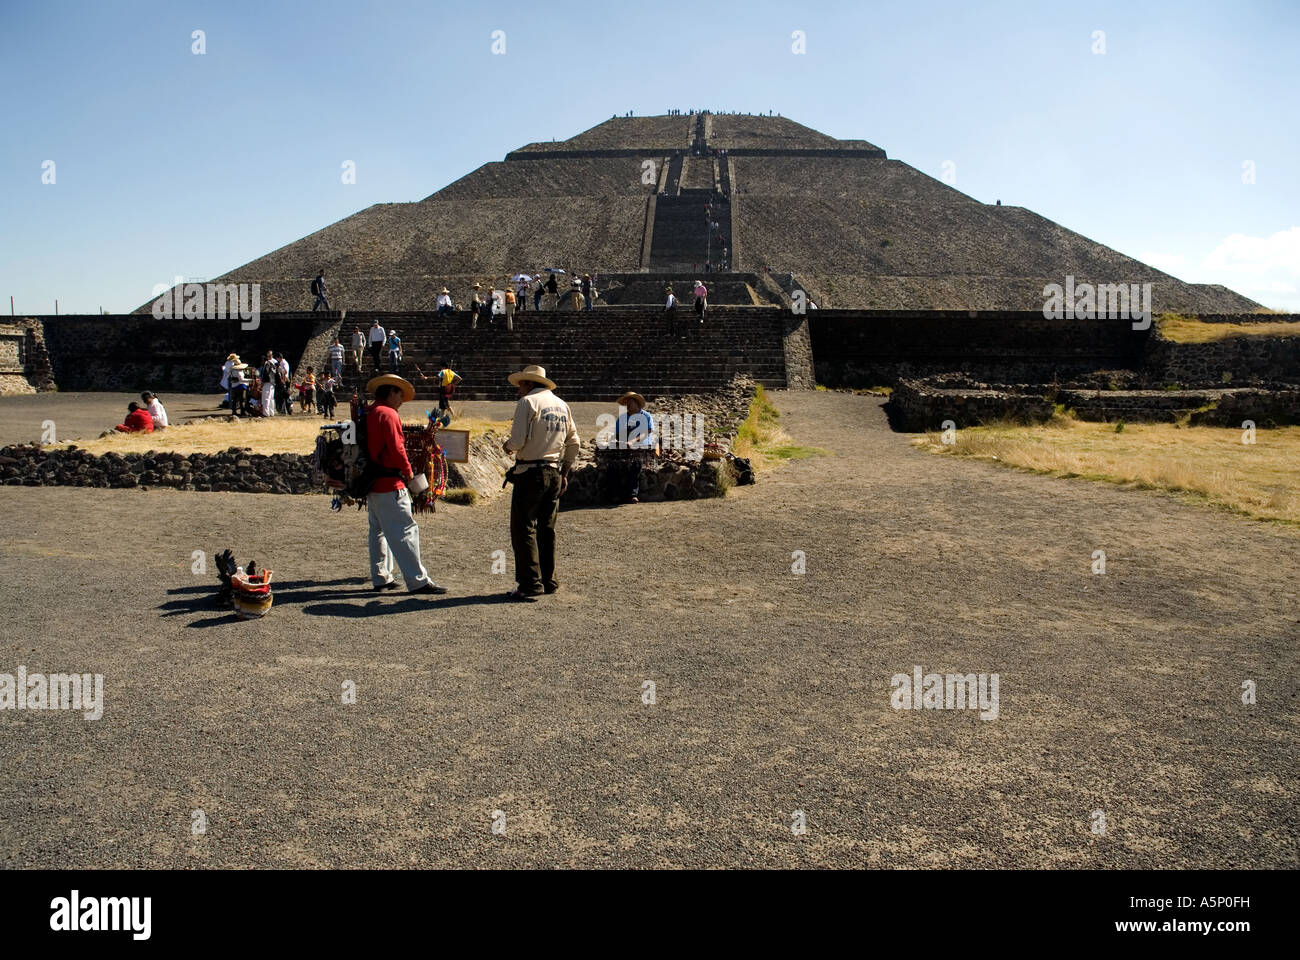 Pyramid of the Sun - Teotihuacan - Mexico Stock Photo